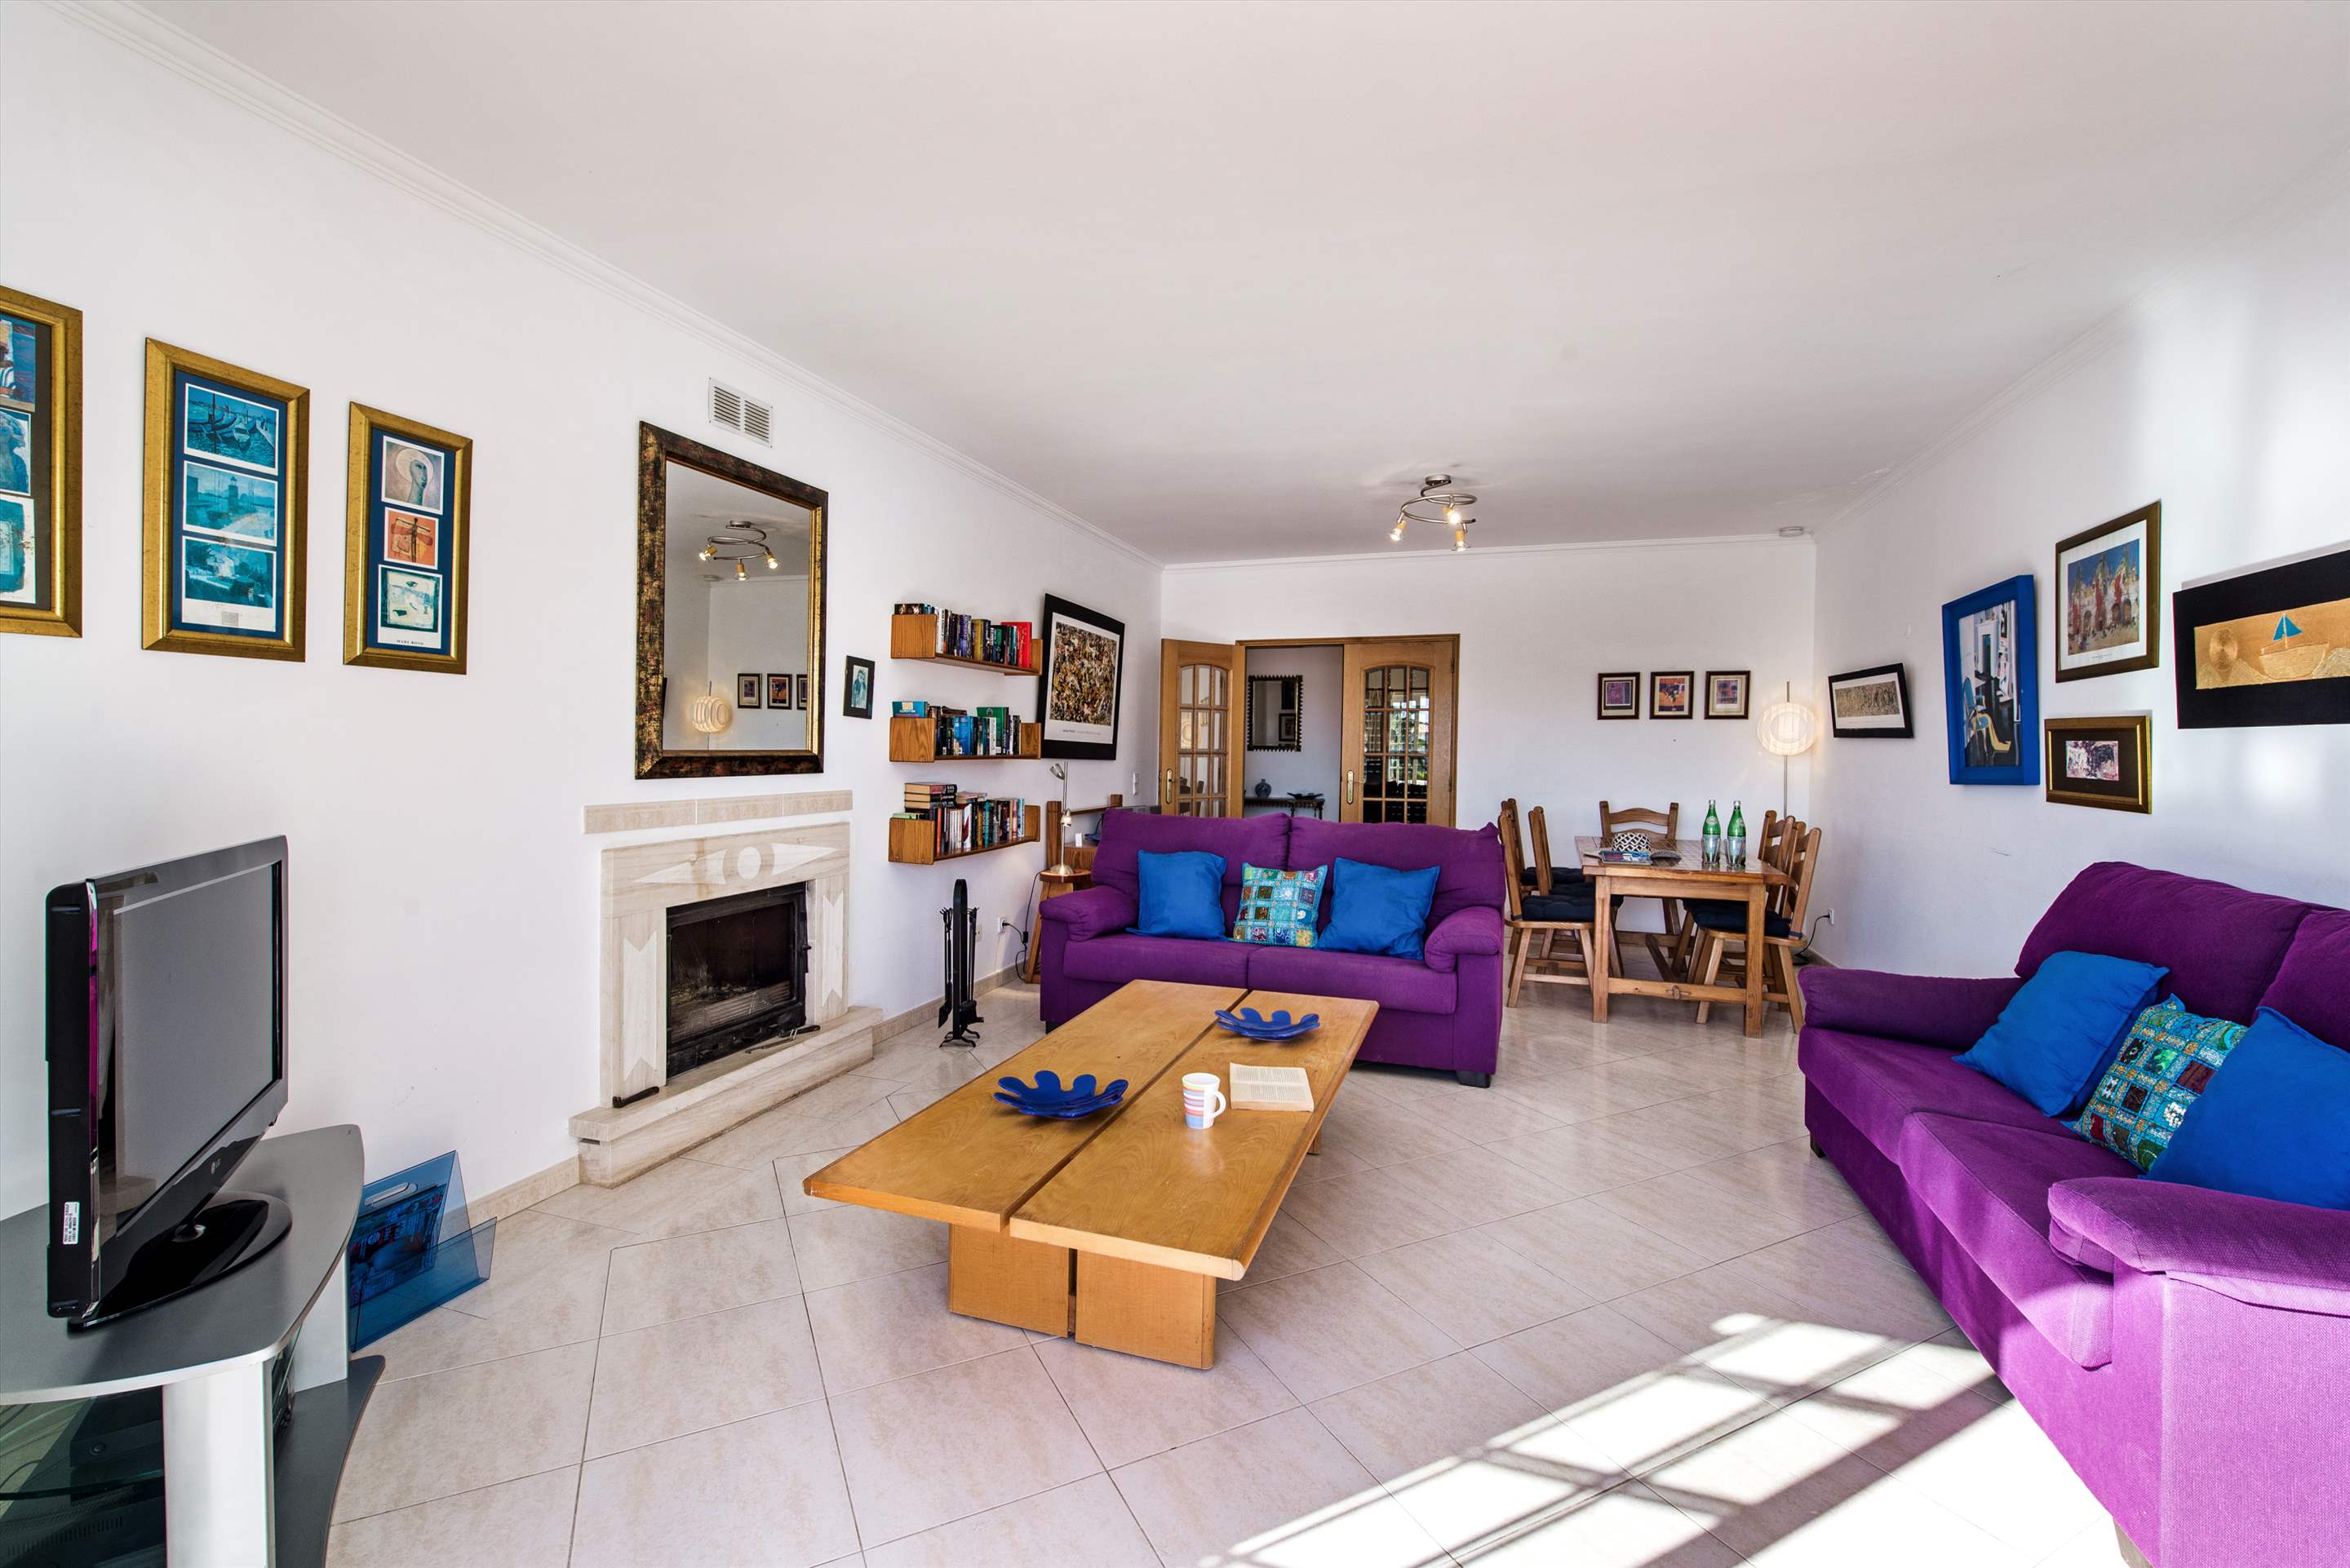 Apt O Monte, For Up to 4 Persons, 2 bedroom apartment in Gale, Vale da Parra and Guia, Algarve Photo #7